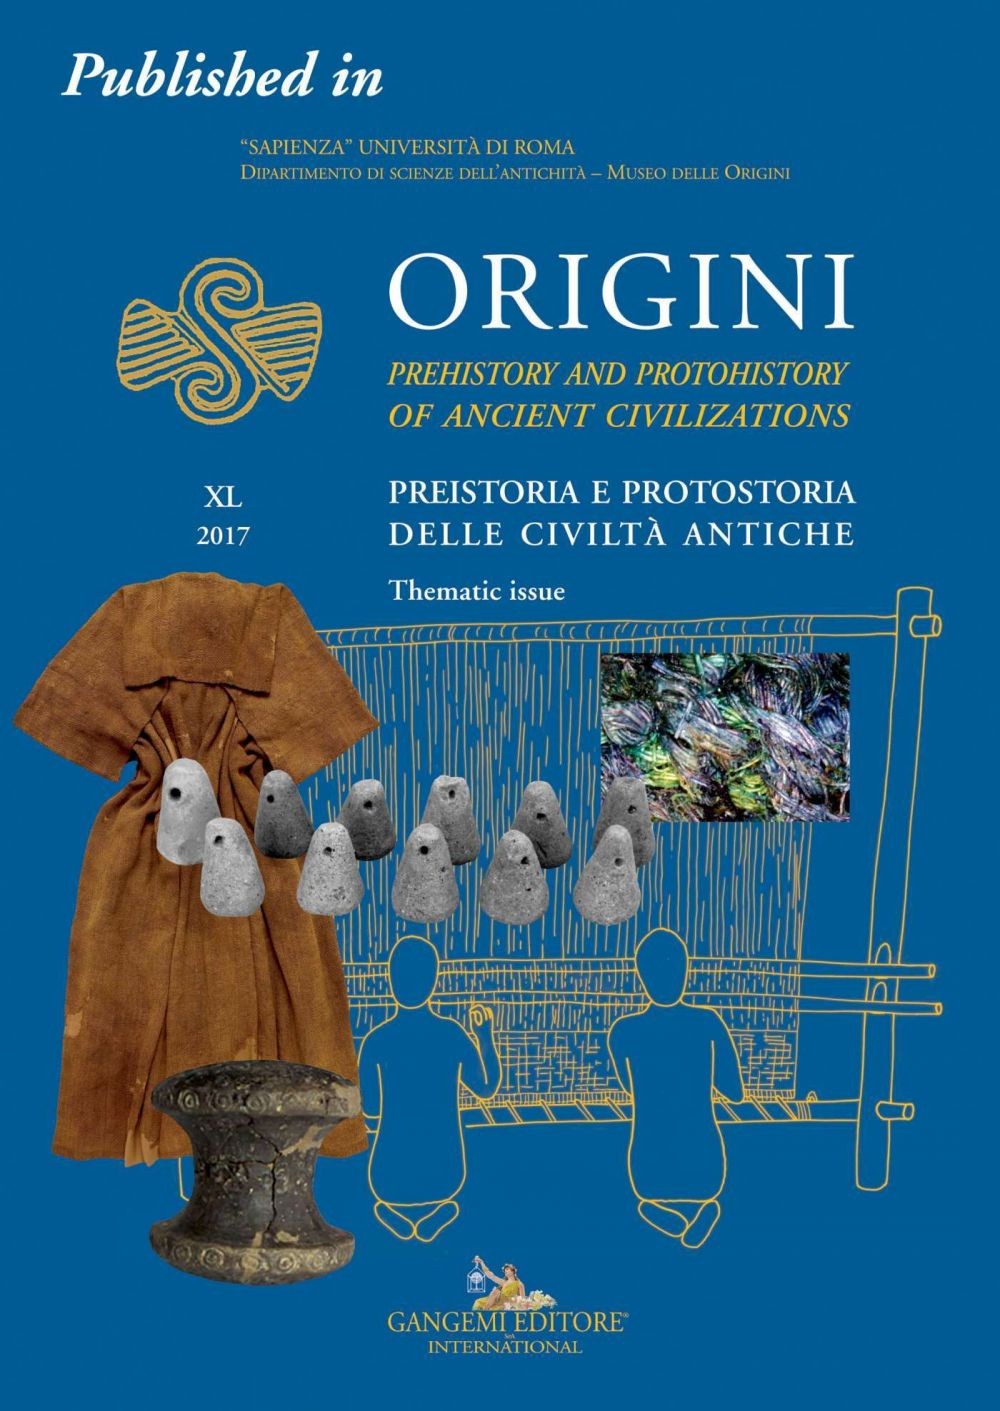 Textiles and clothing traditions in early Iron Age Denmark - Librerie.coop